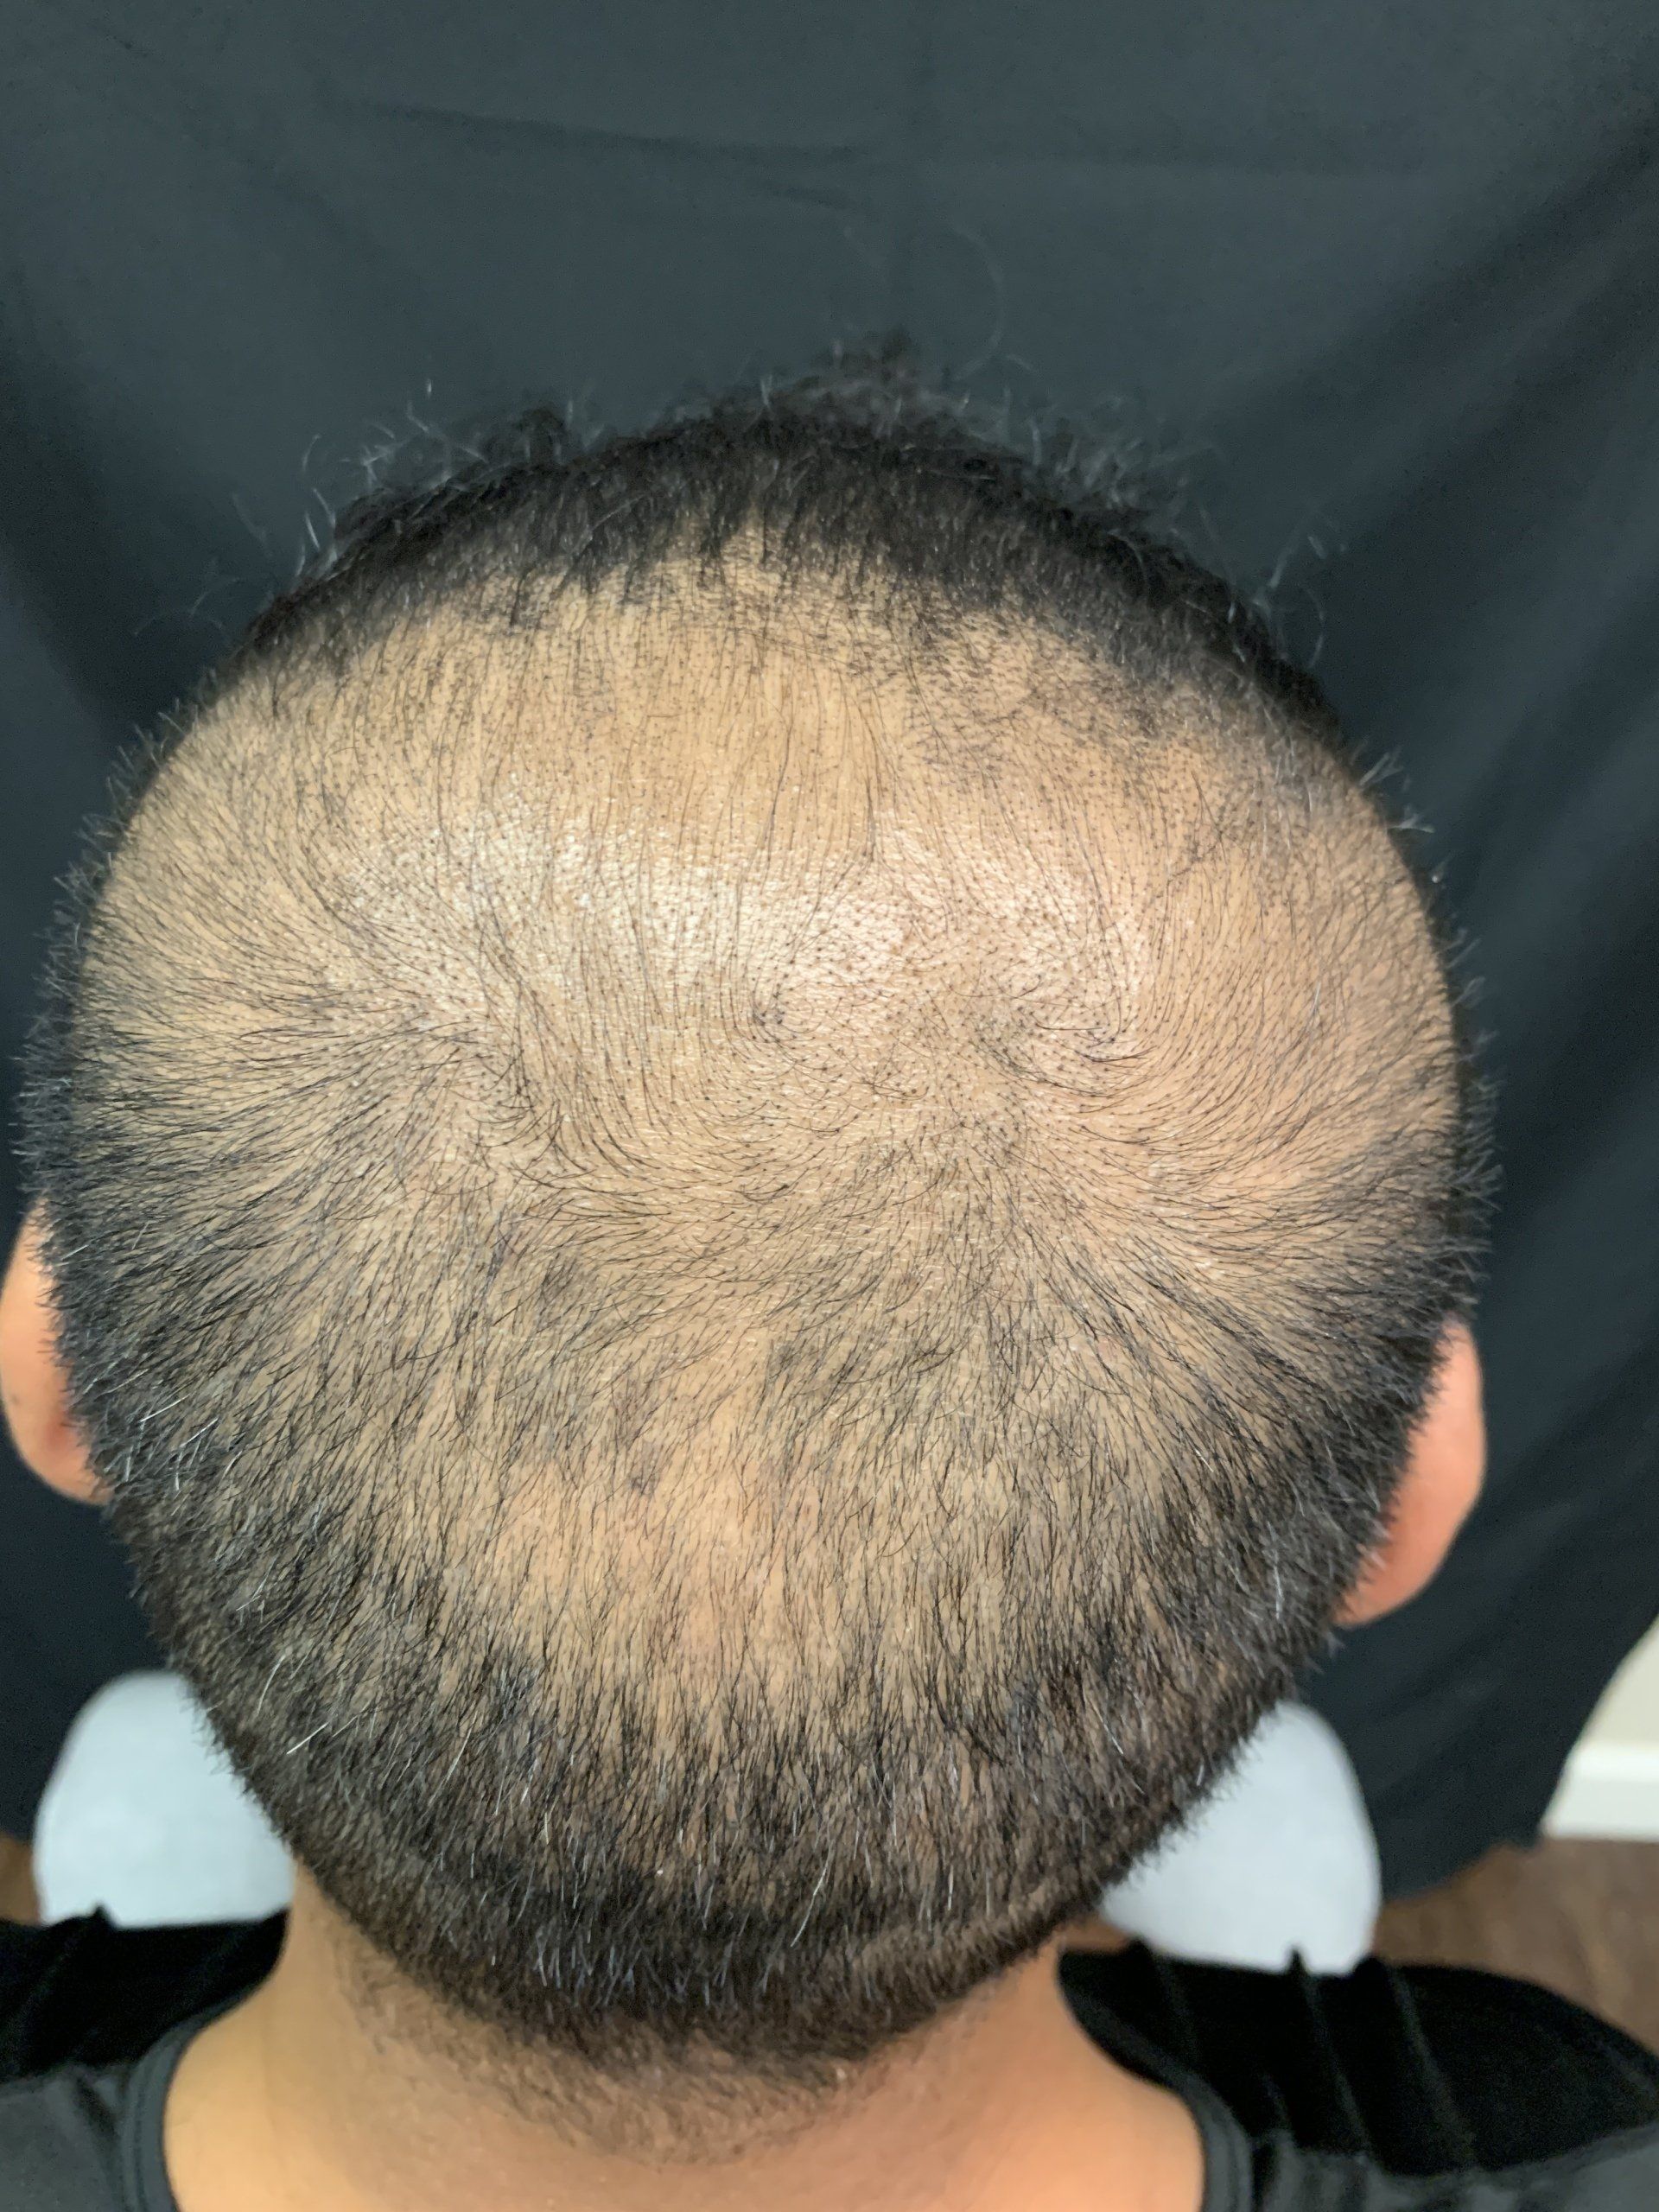 A picture taken before balding male gets hair replacement service also known as scalp micropigmentation